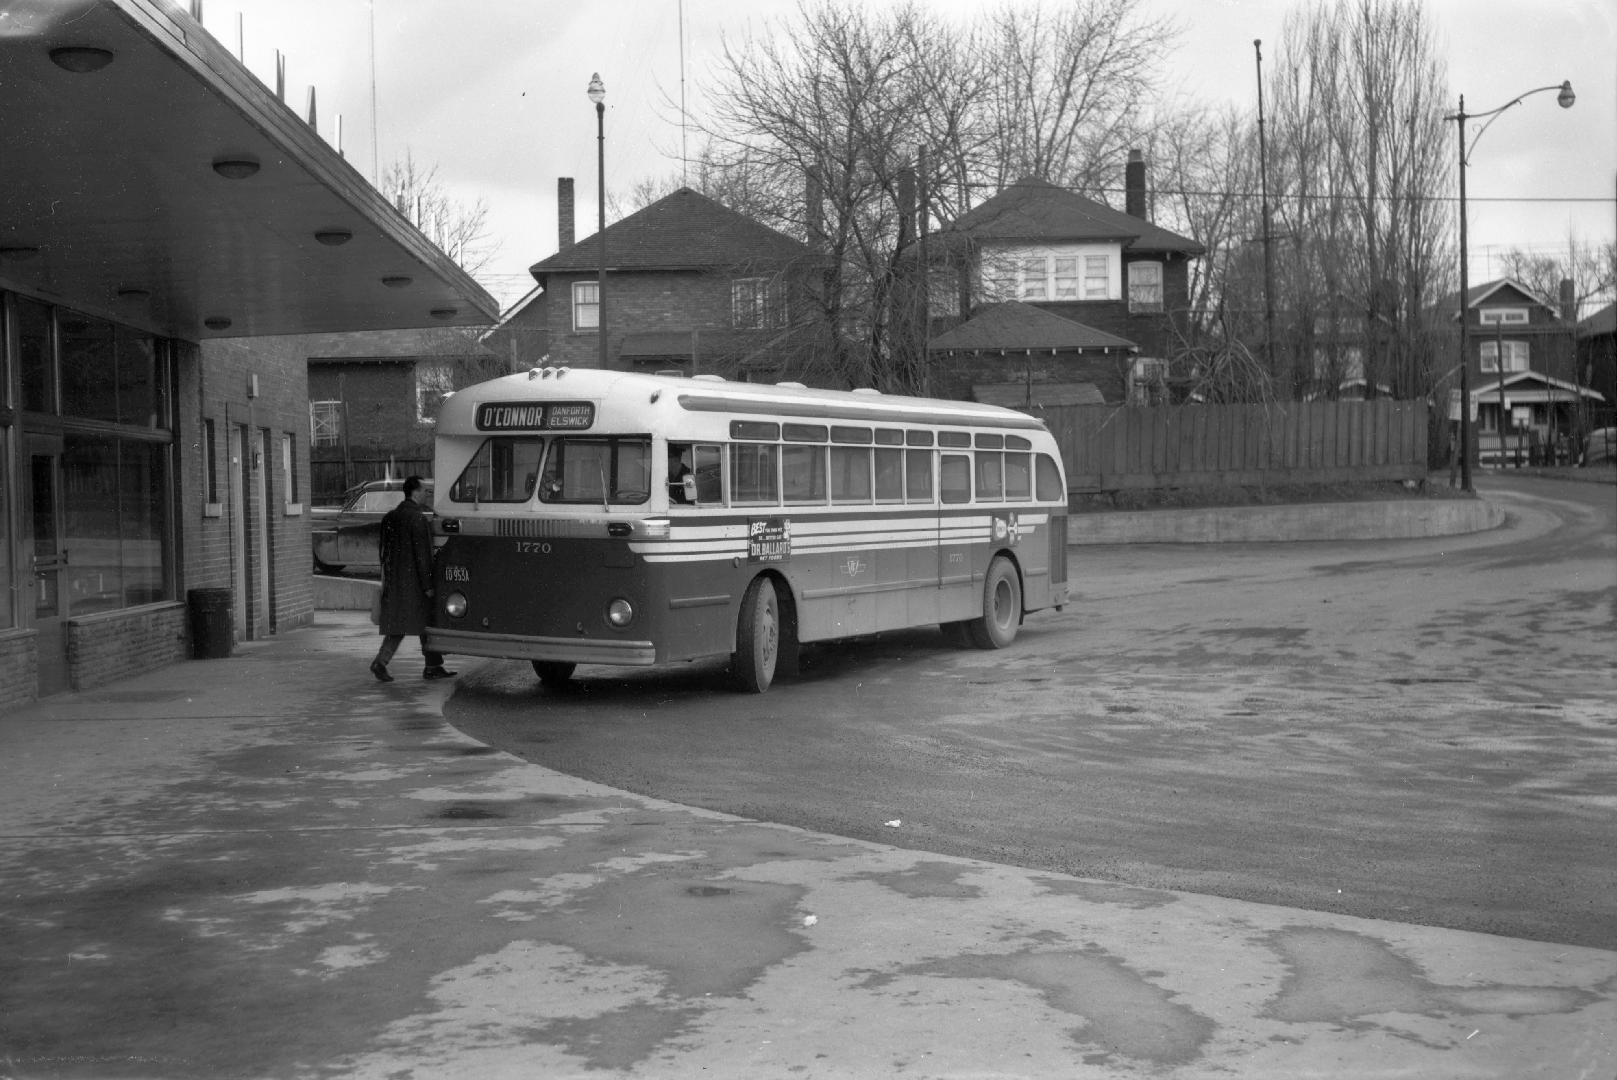 T.T.C., bus #1770, at former Hollinger Bus Lines terminal, Danforth Avenue, north side, between Coxwell & Woodington Aves